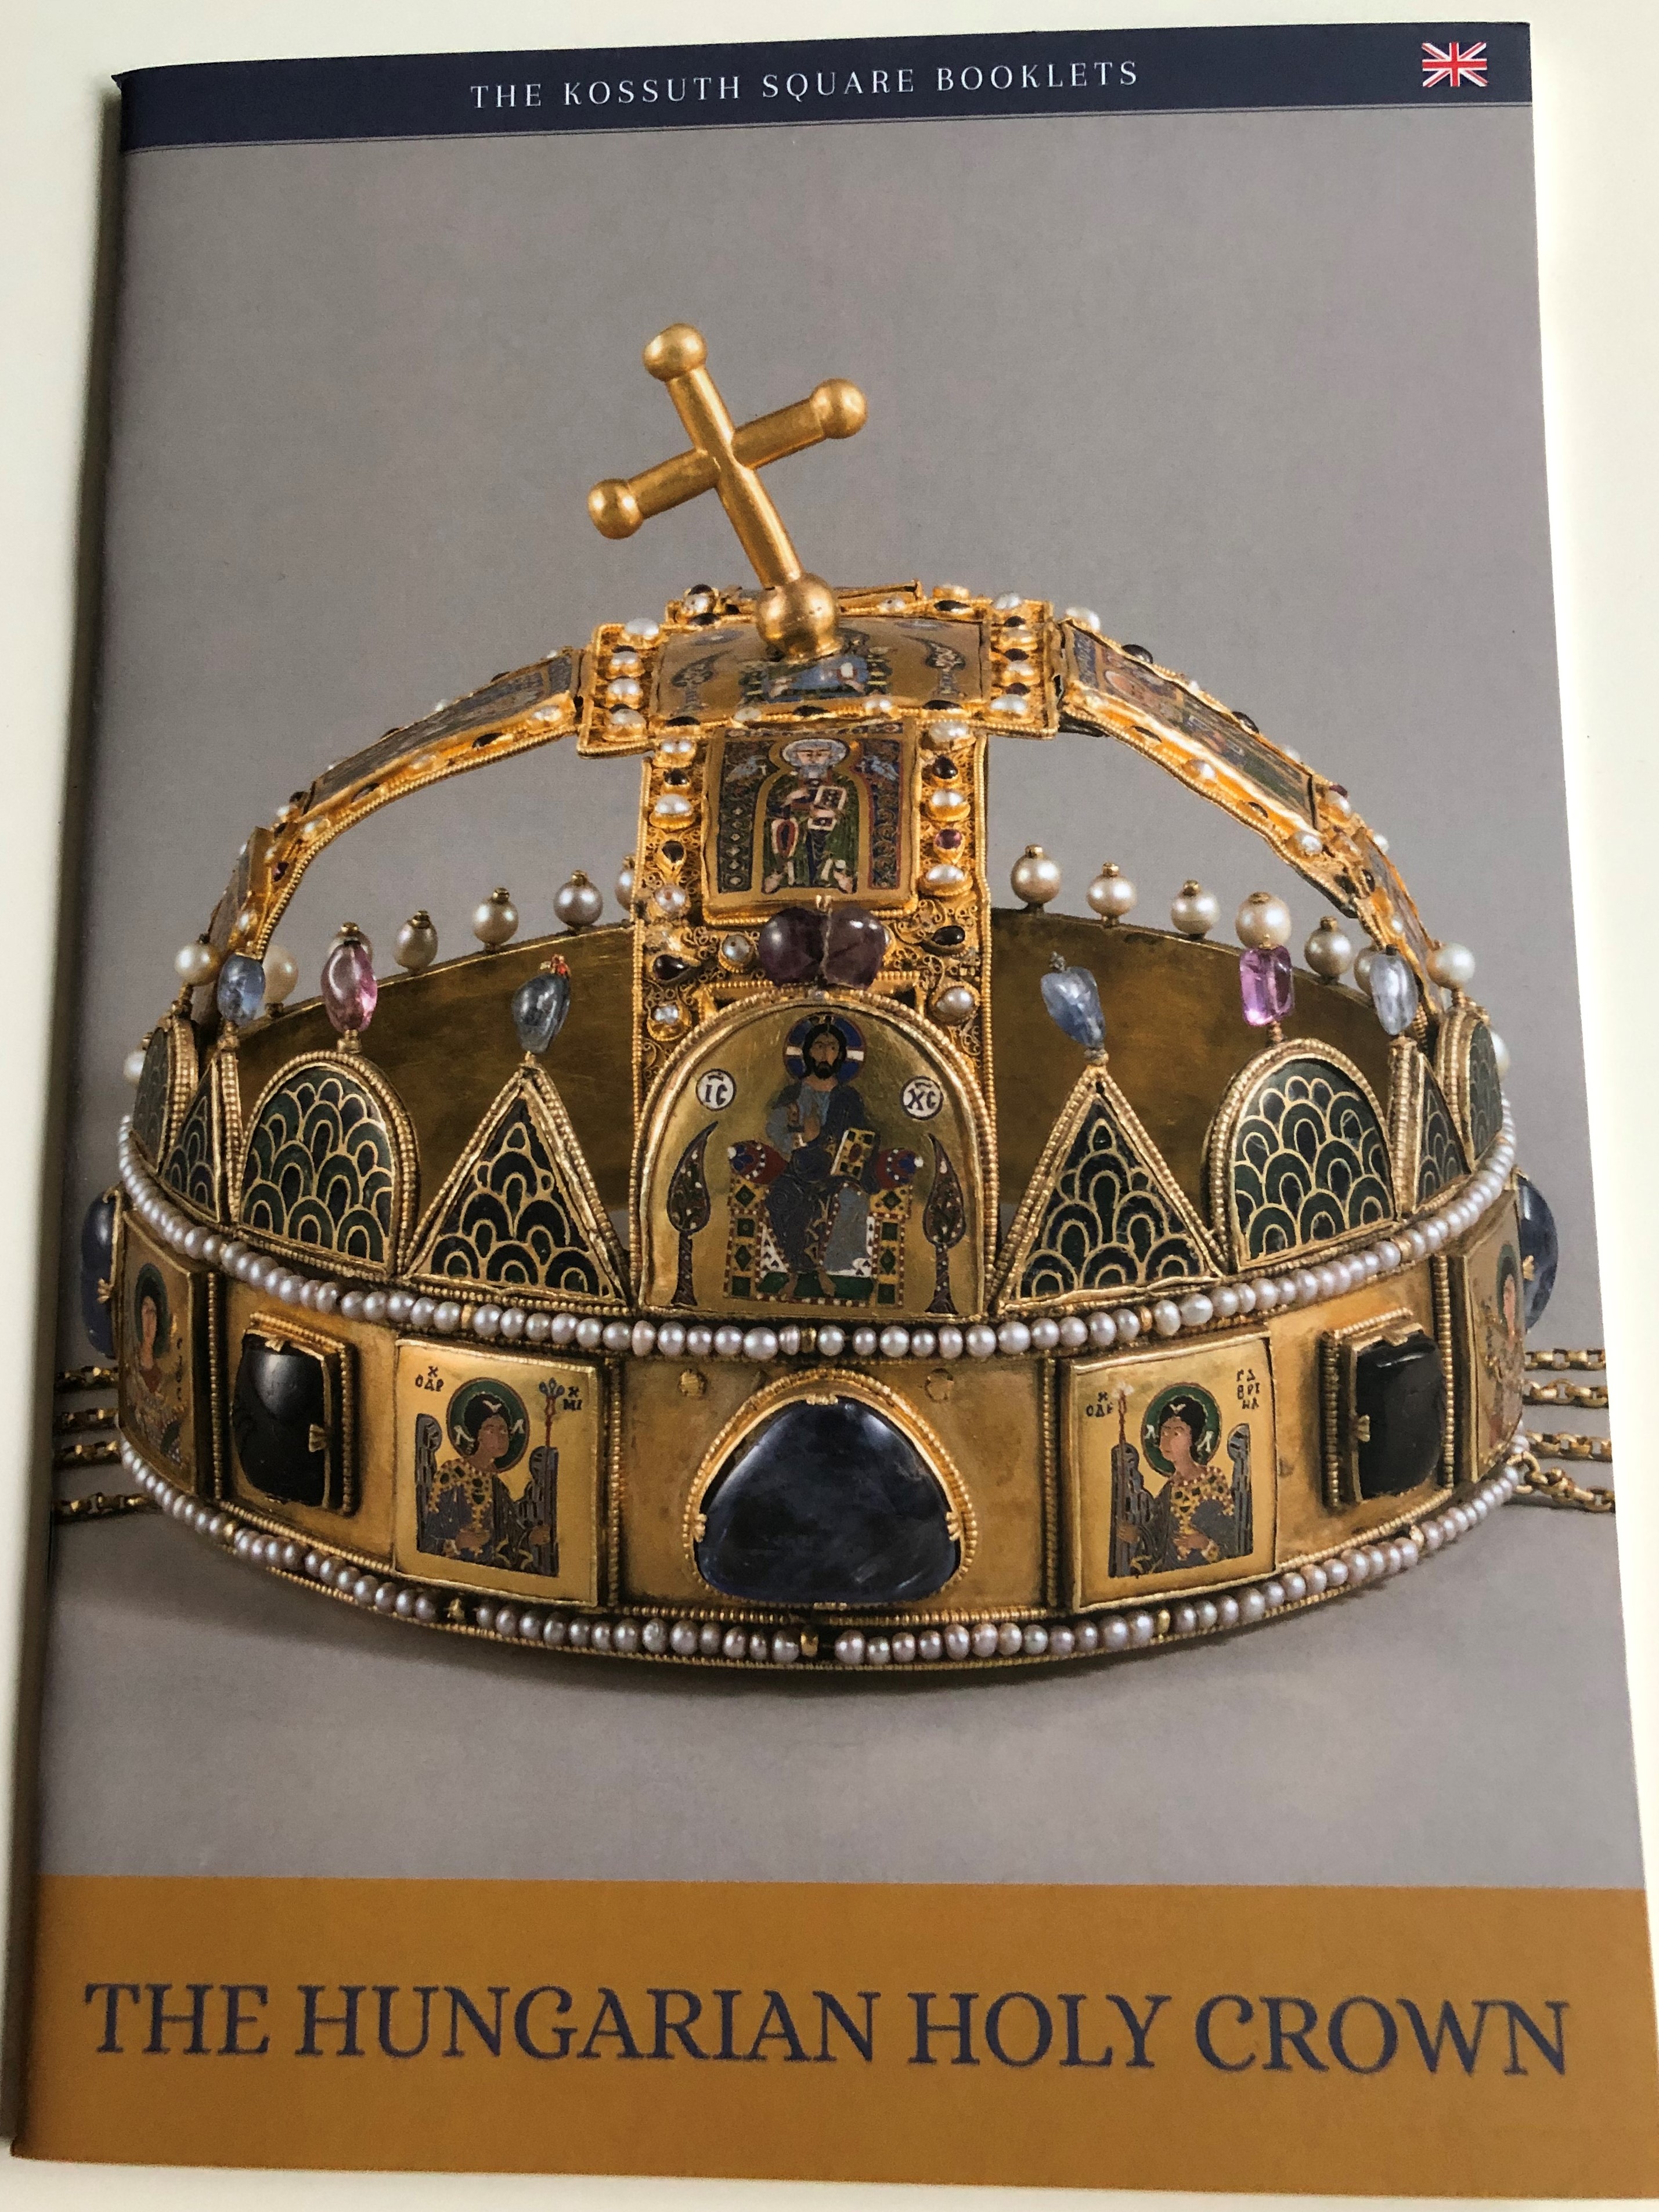 the-hungarian-holy-crown-by-orsolya-moravetz-the-kossuth-square-booklets-the-office-of-the-hungarian-national-assembly-2018-1-.jpg